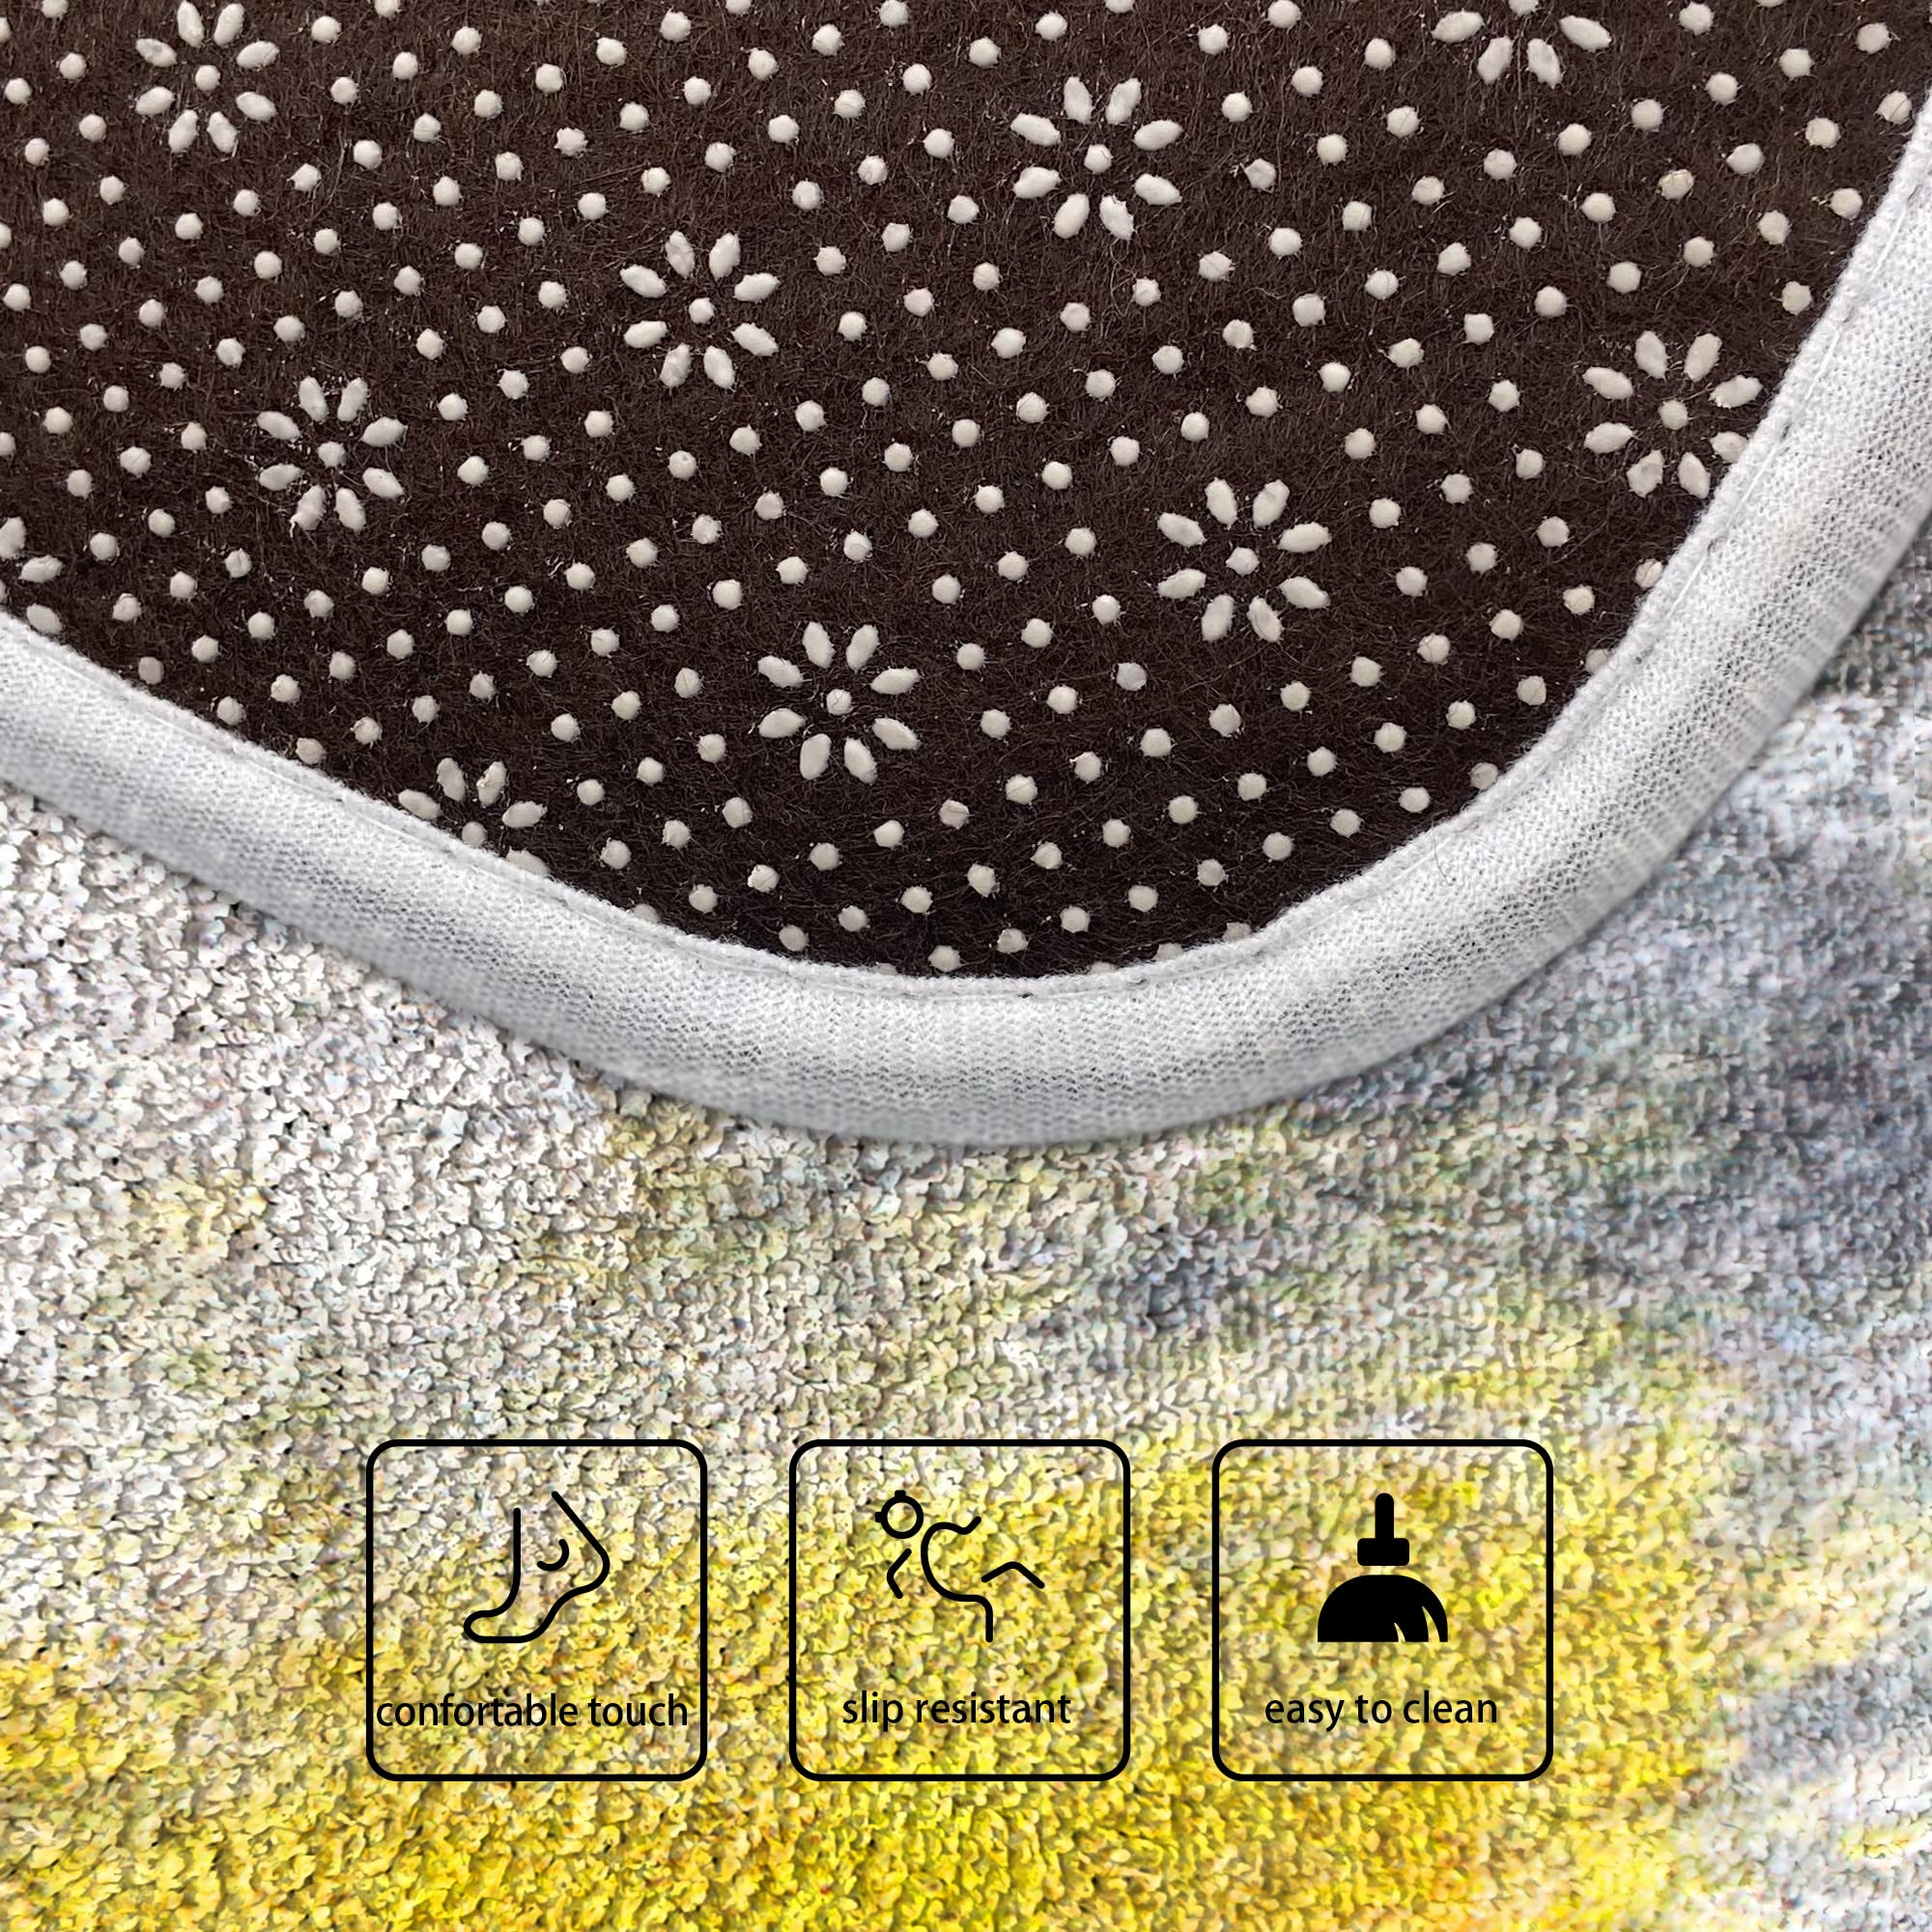 Subently 2PCS Yellow Ombre Kitchen Rugs Abstract Floor Runner Yellow and Gray Non-Slip Area Carpets Mustard Grunge Kitchen Mat Set for Farmhouse Bathroom Laundry 16" x 47"